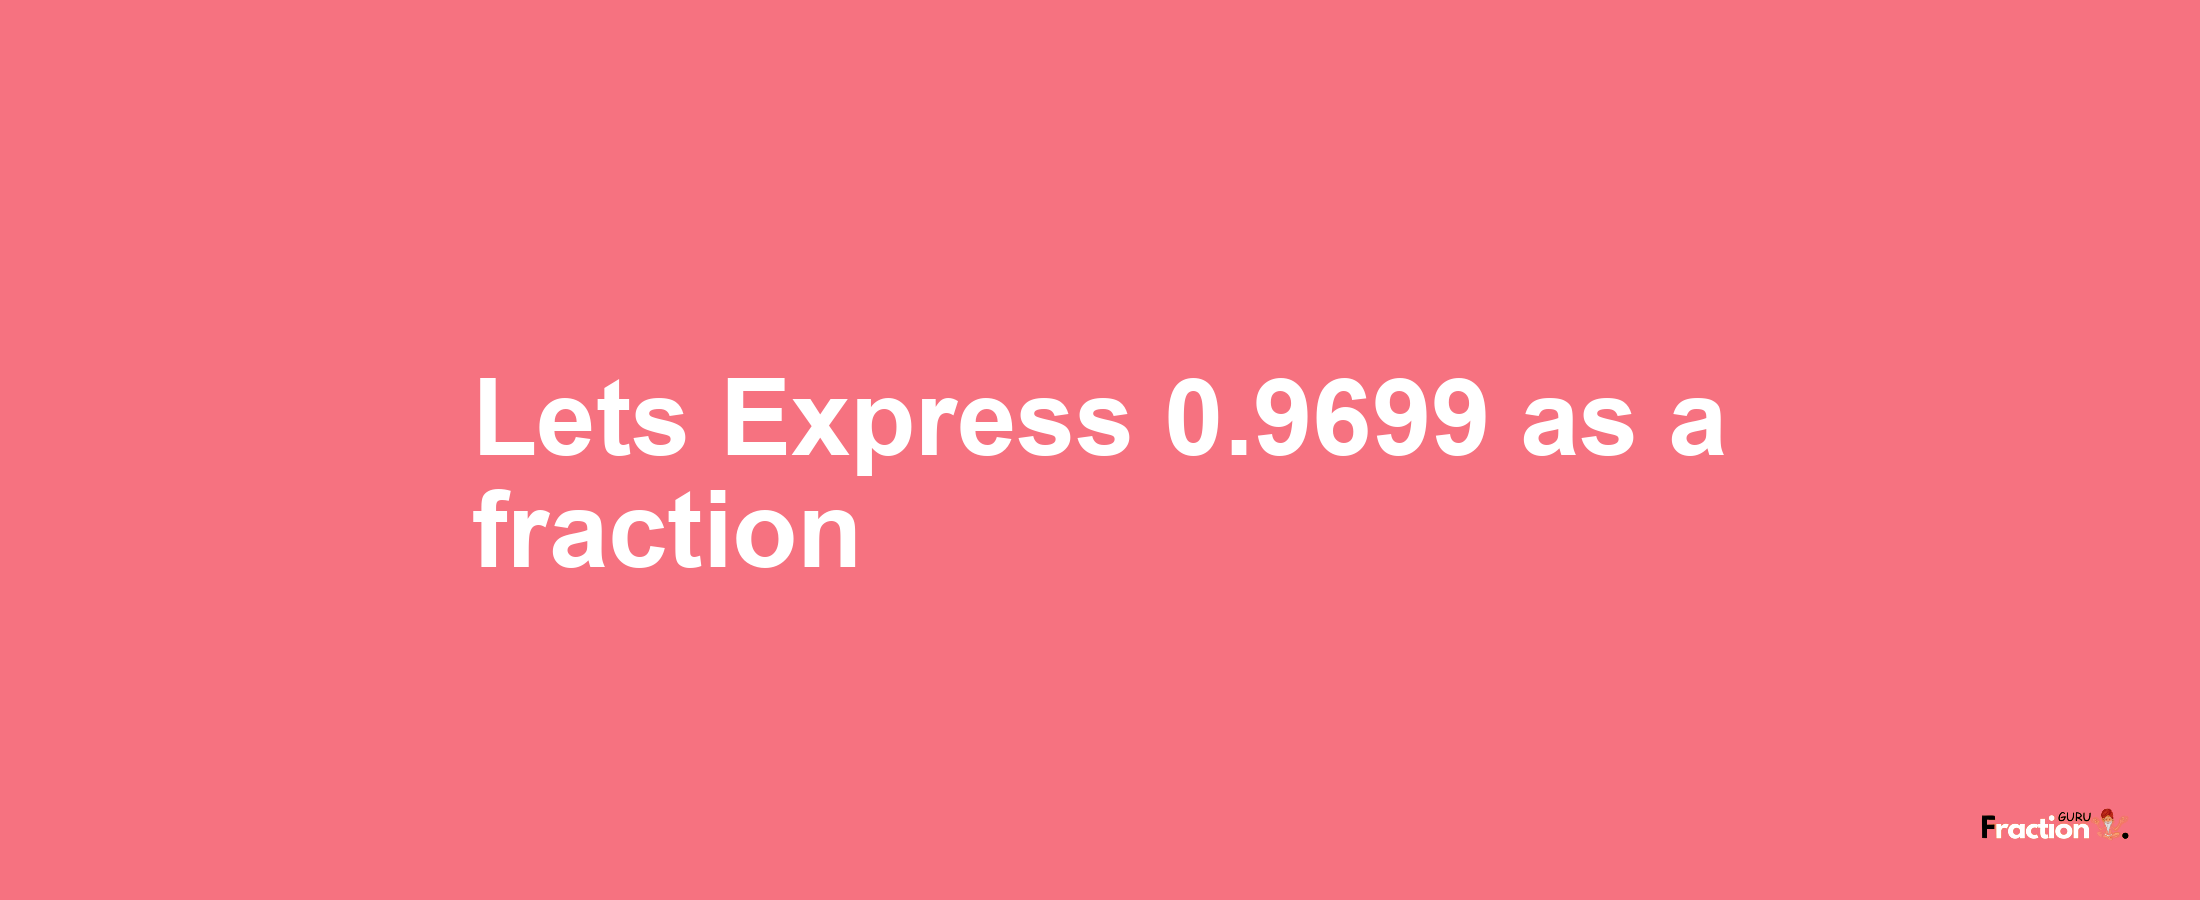 Lets Express 0.9699 as afraction